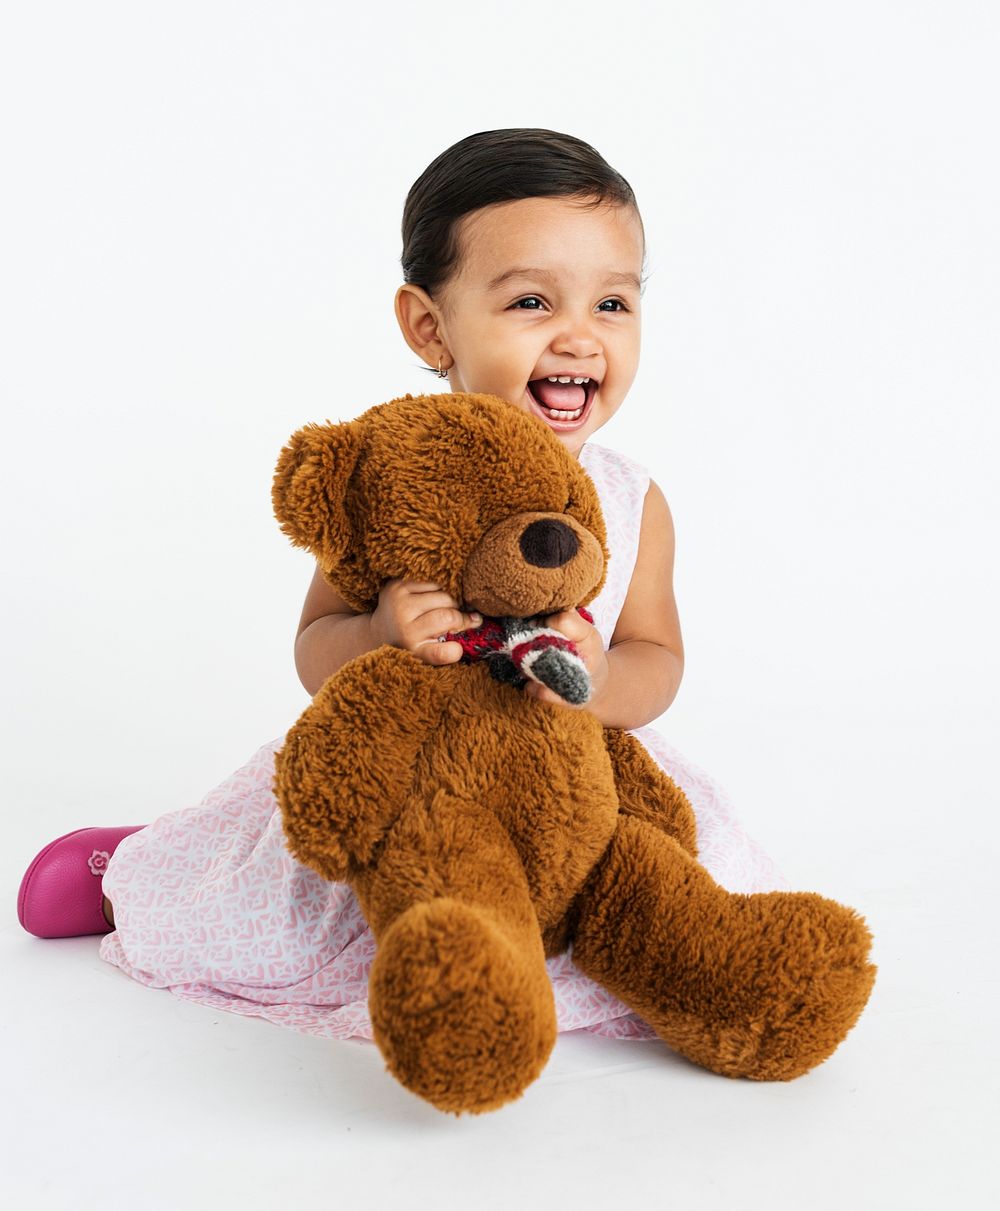 Little Girl Smiling Happiness Playful Teddy Bear Portrait Concept